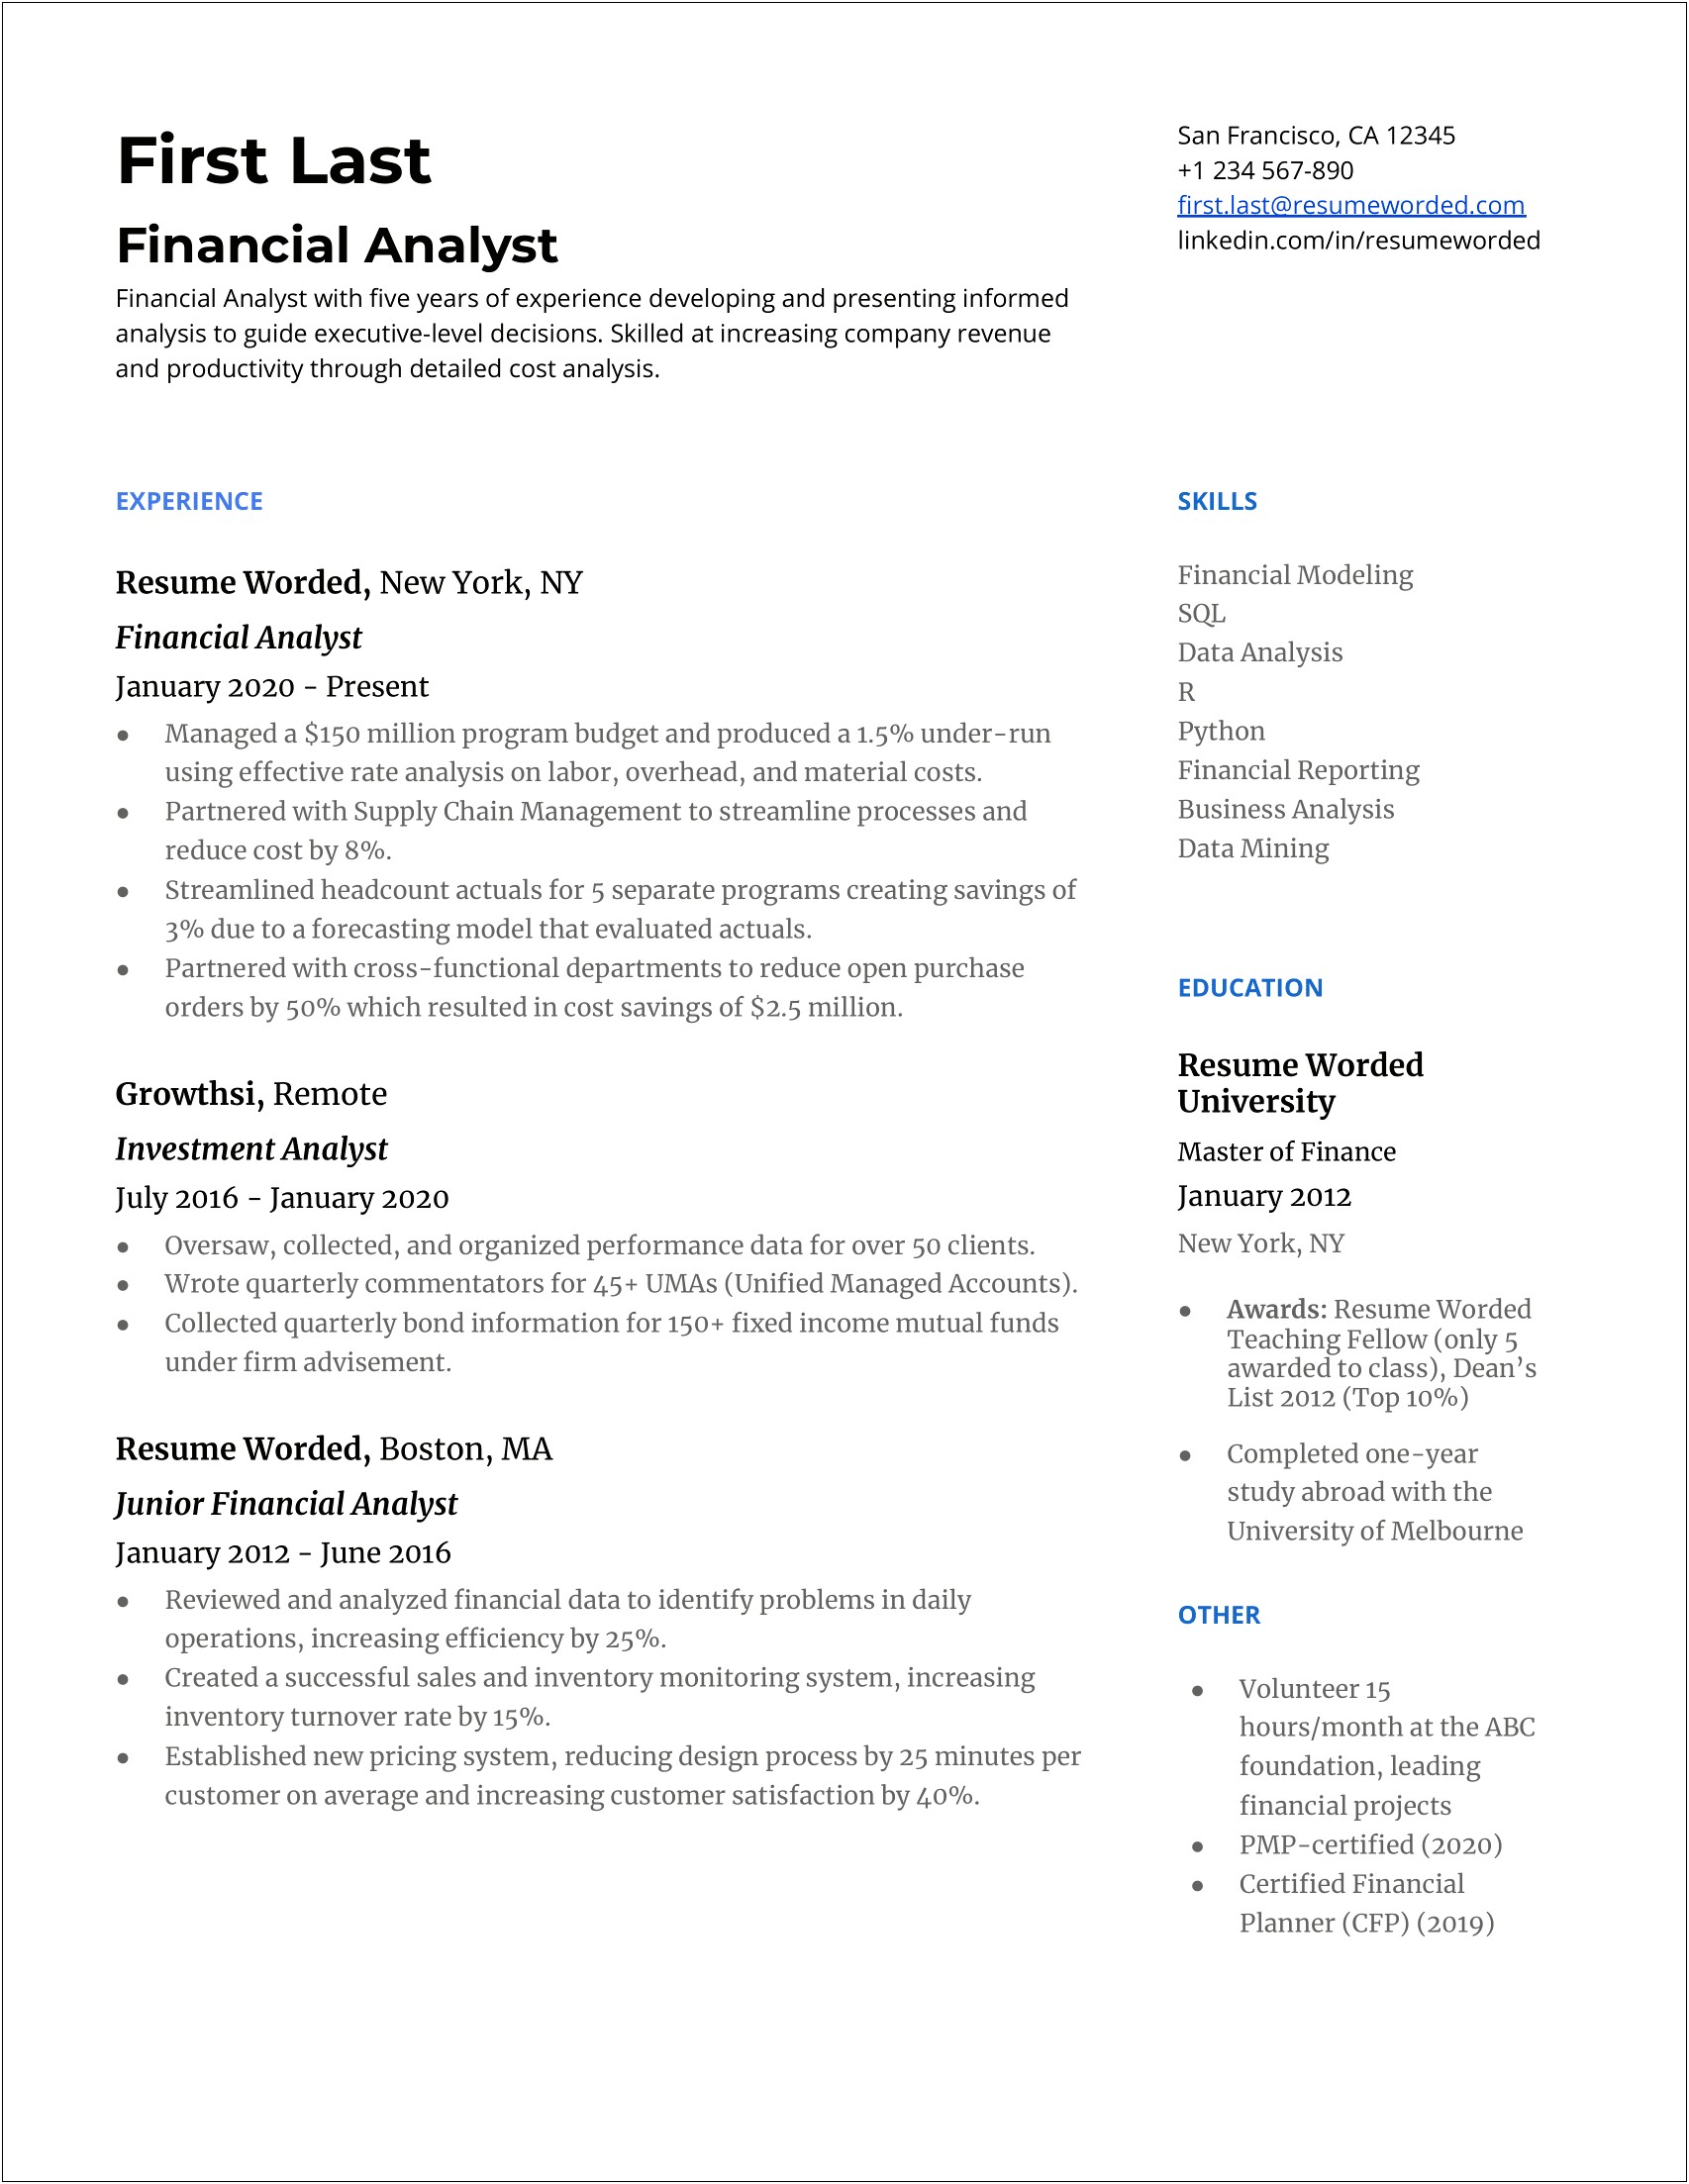 Functional Resume Sample For Financial Analyst